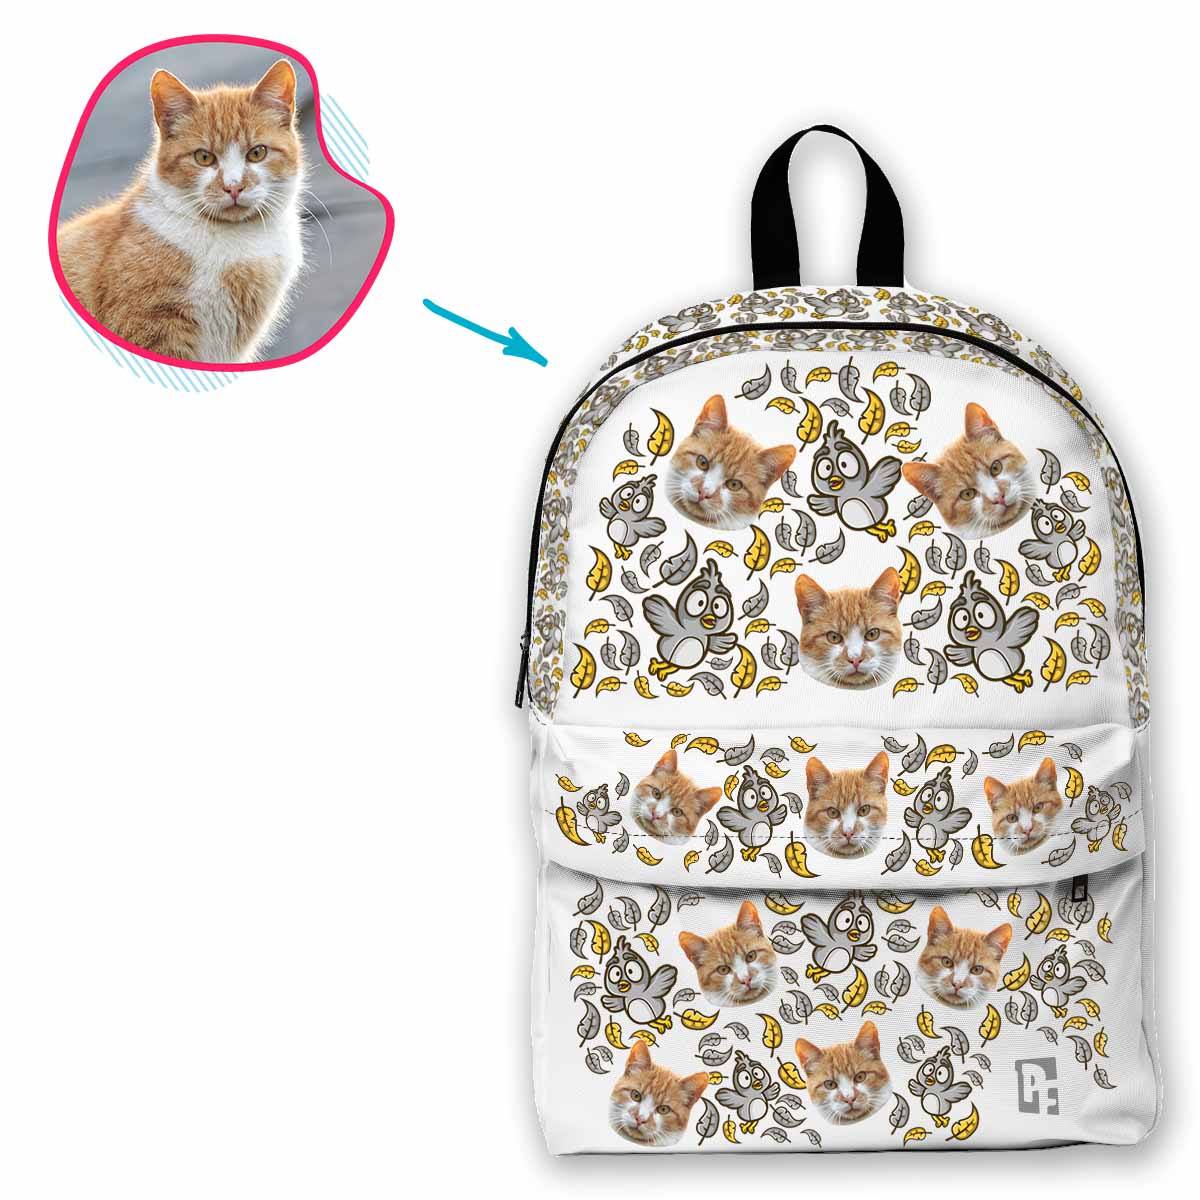 white Bird classic backpack personalized with photo of face printed on it